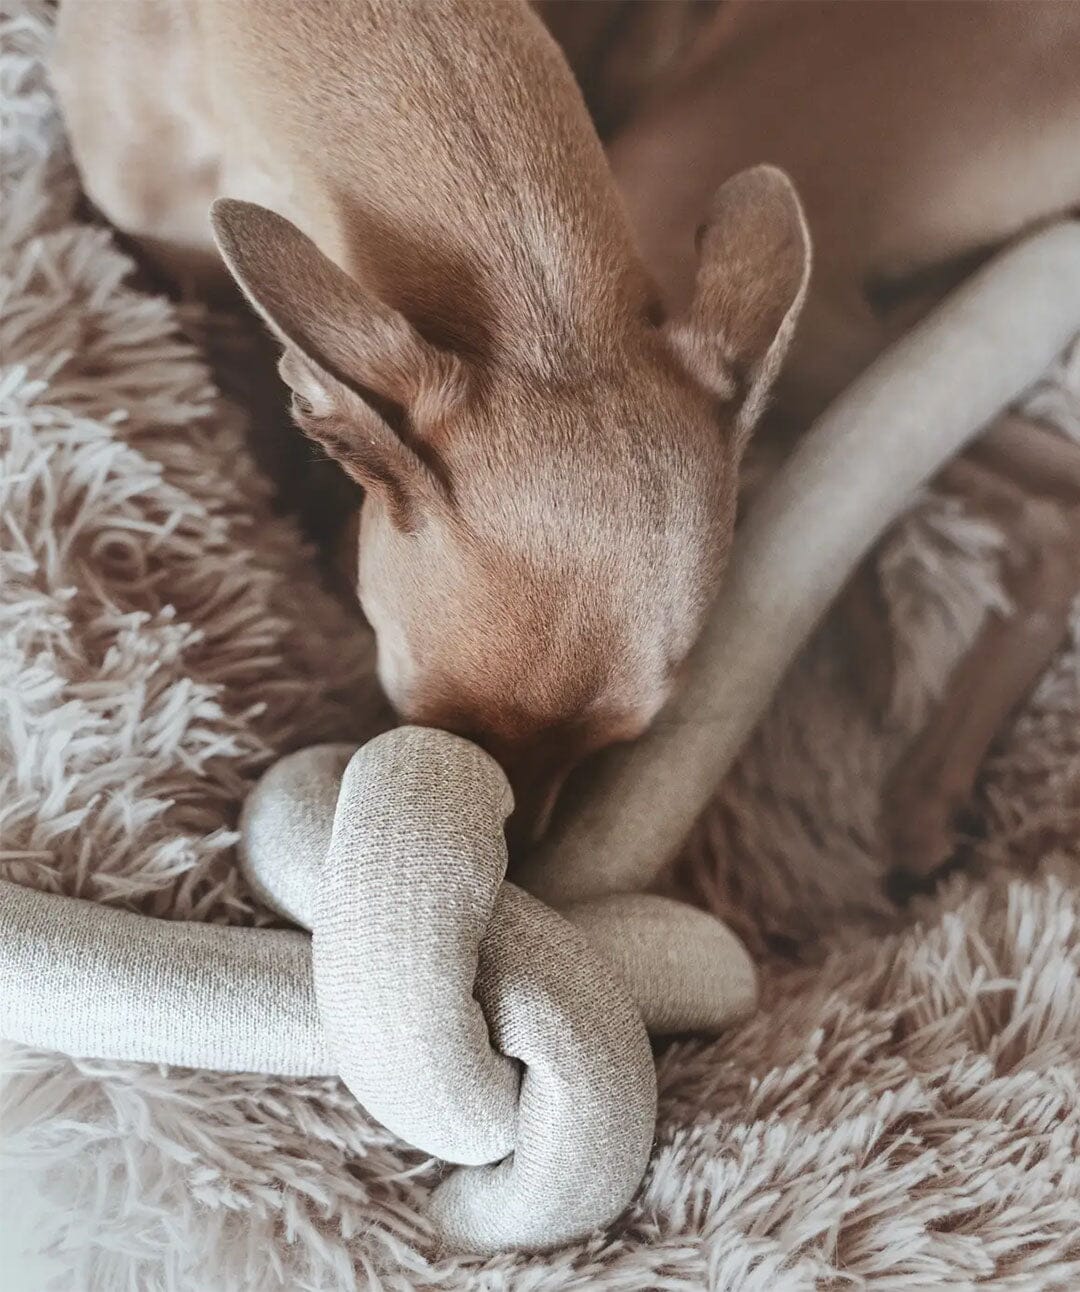 Small dog snuggling a knotted puzzle dog toy